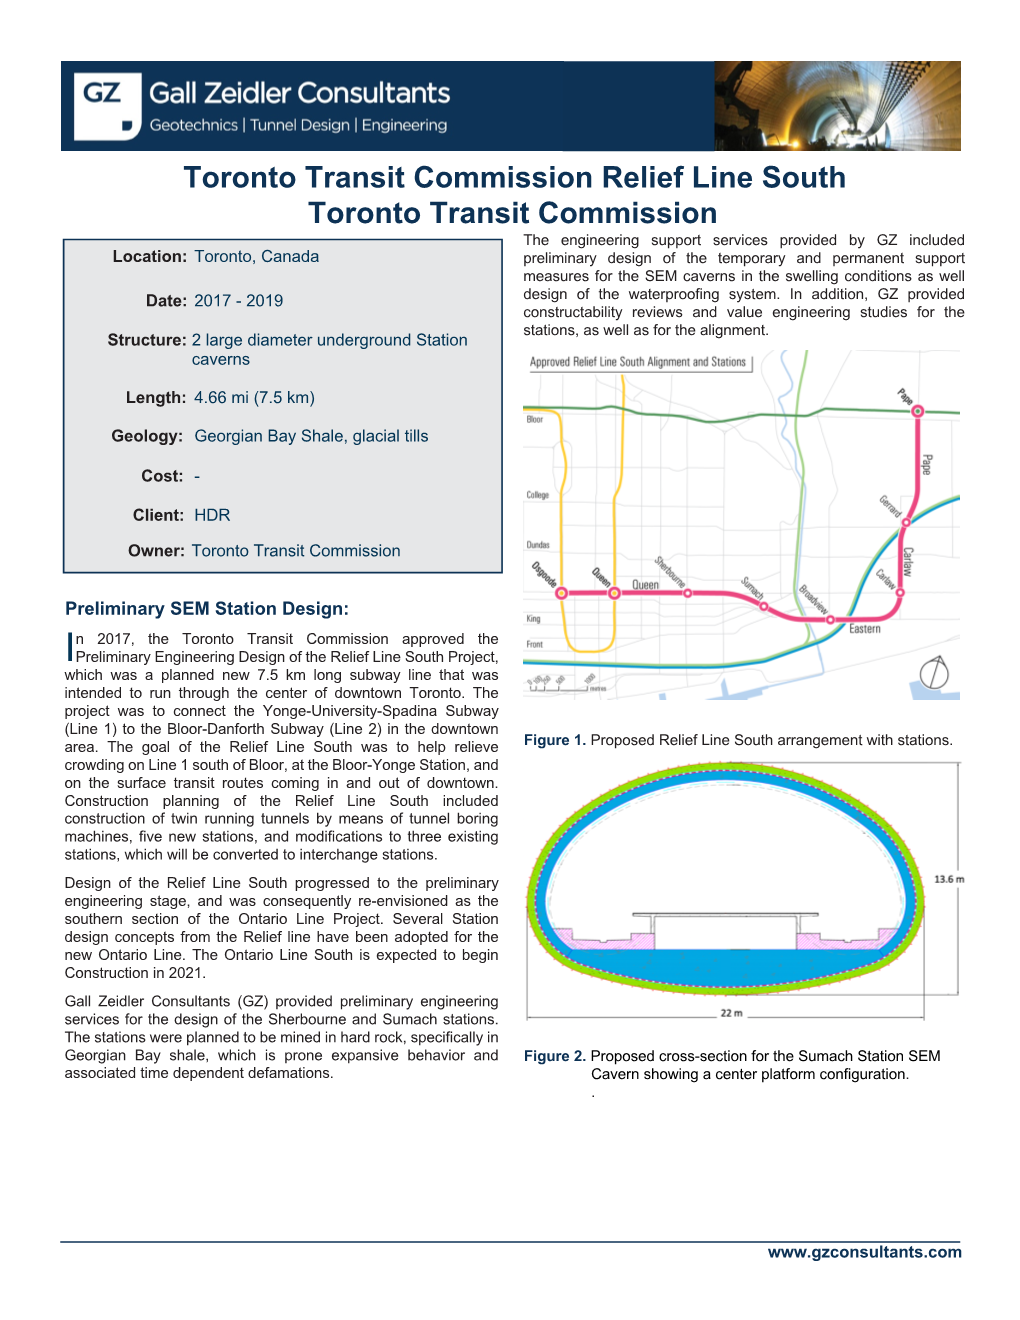 Toronto Transit Commission Relief Line South Toronto Transit Commission